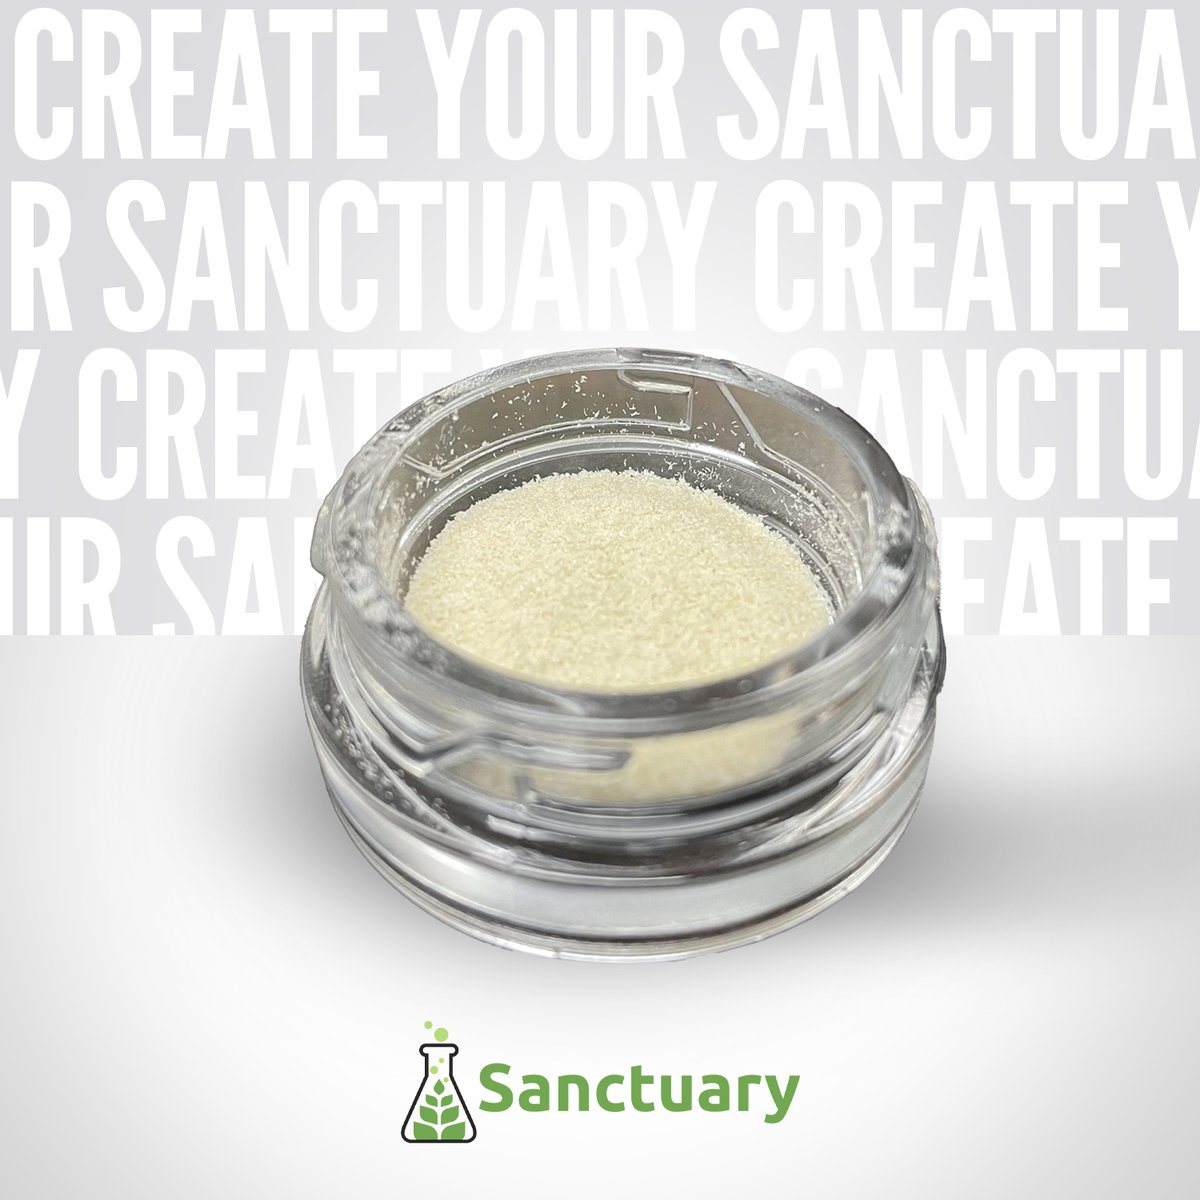 Don’t let goodness go to waste. Sanctuary’s Ki*f is potent and packed with the best terp*n*s. Sprinkle and enjoy. 😎#mondaygrind 🍃 Sanctuary FL 🌐 sanctuarymed.com 21+ Only. Nothing for sale on IG/FB/X. Subject to in-store availability